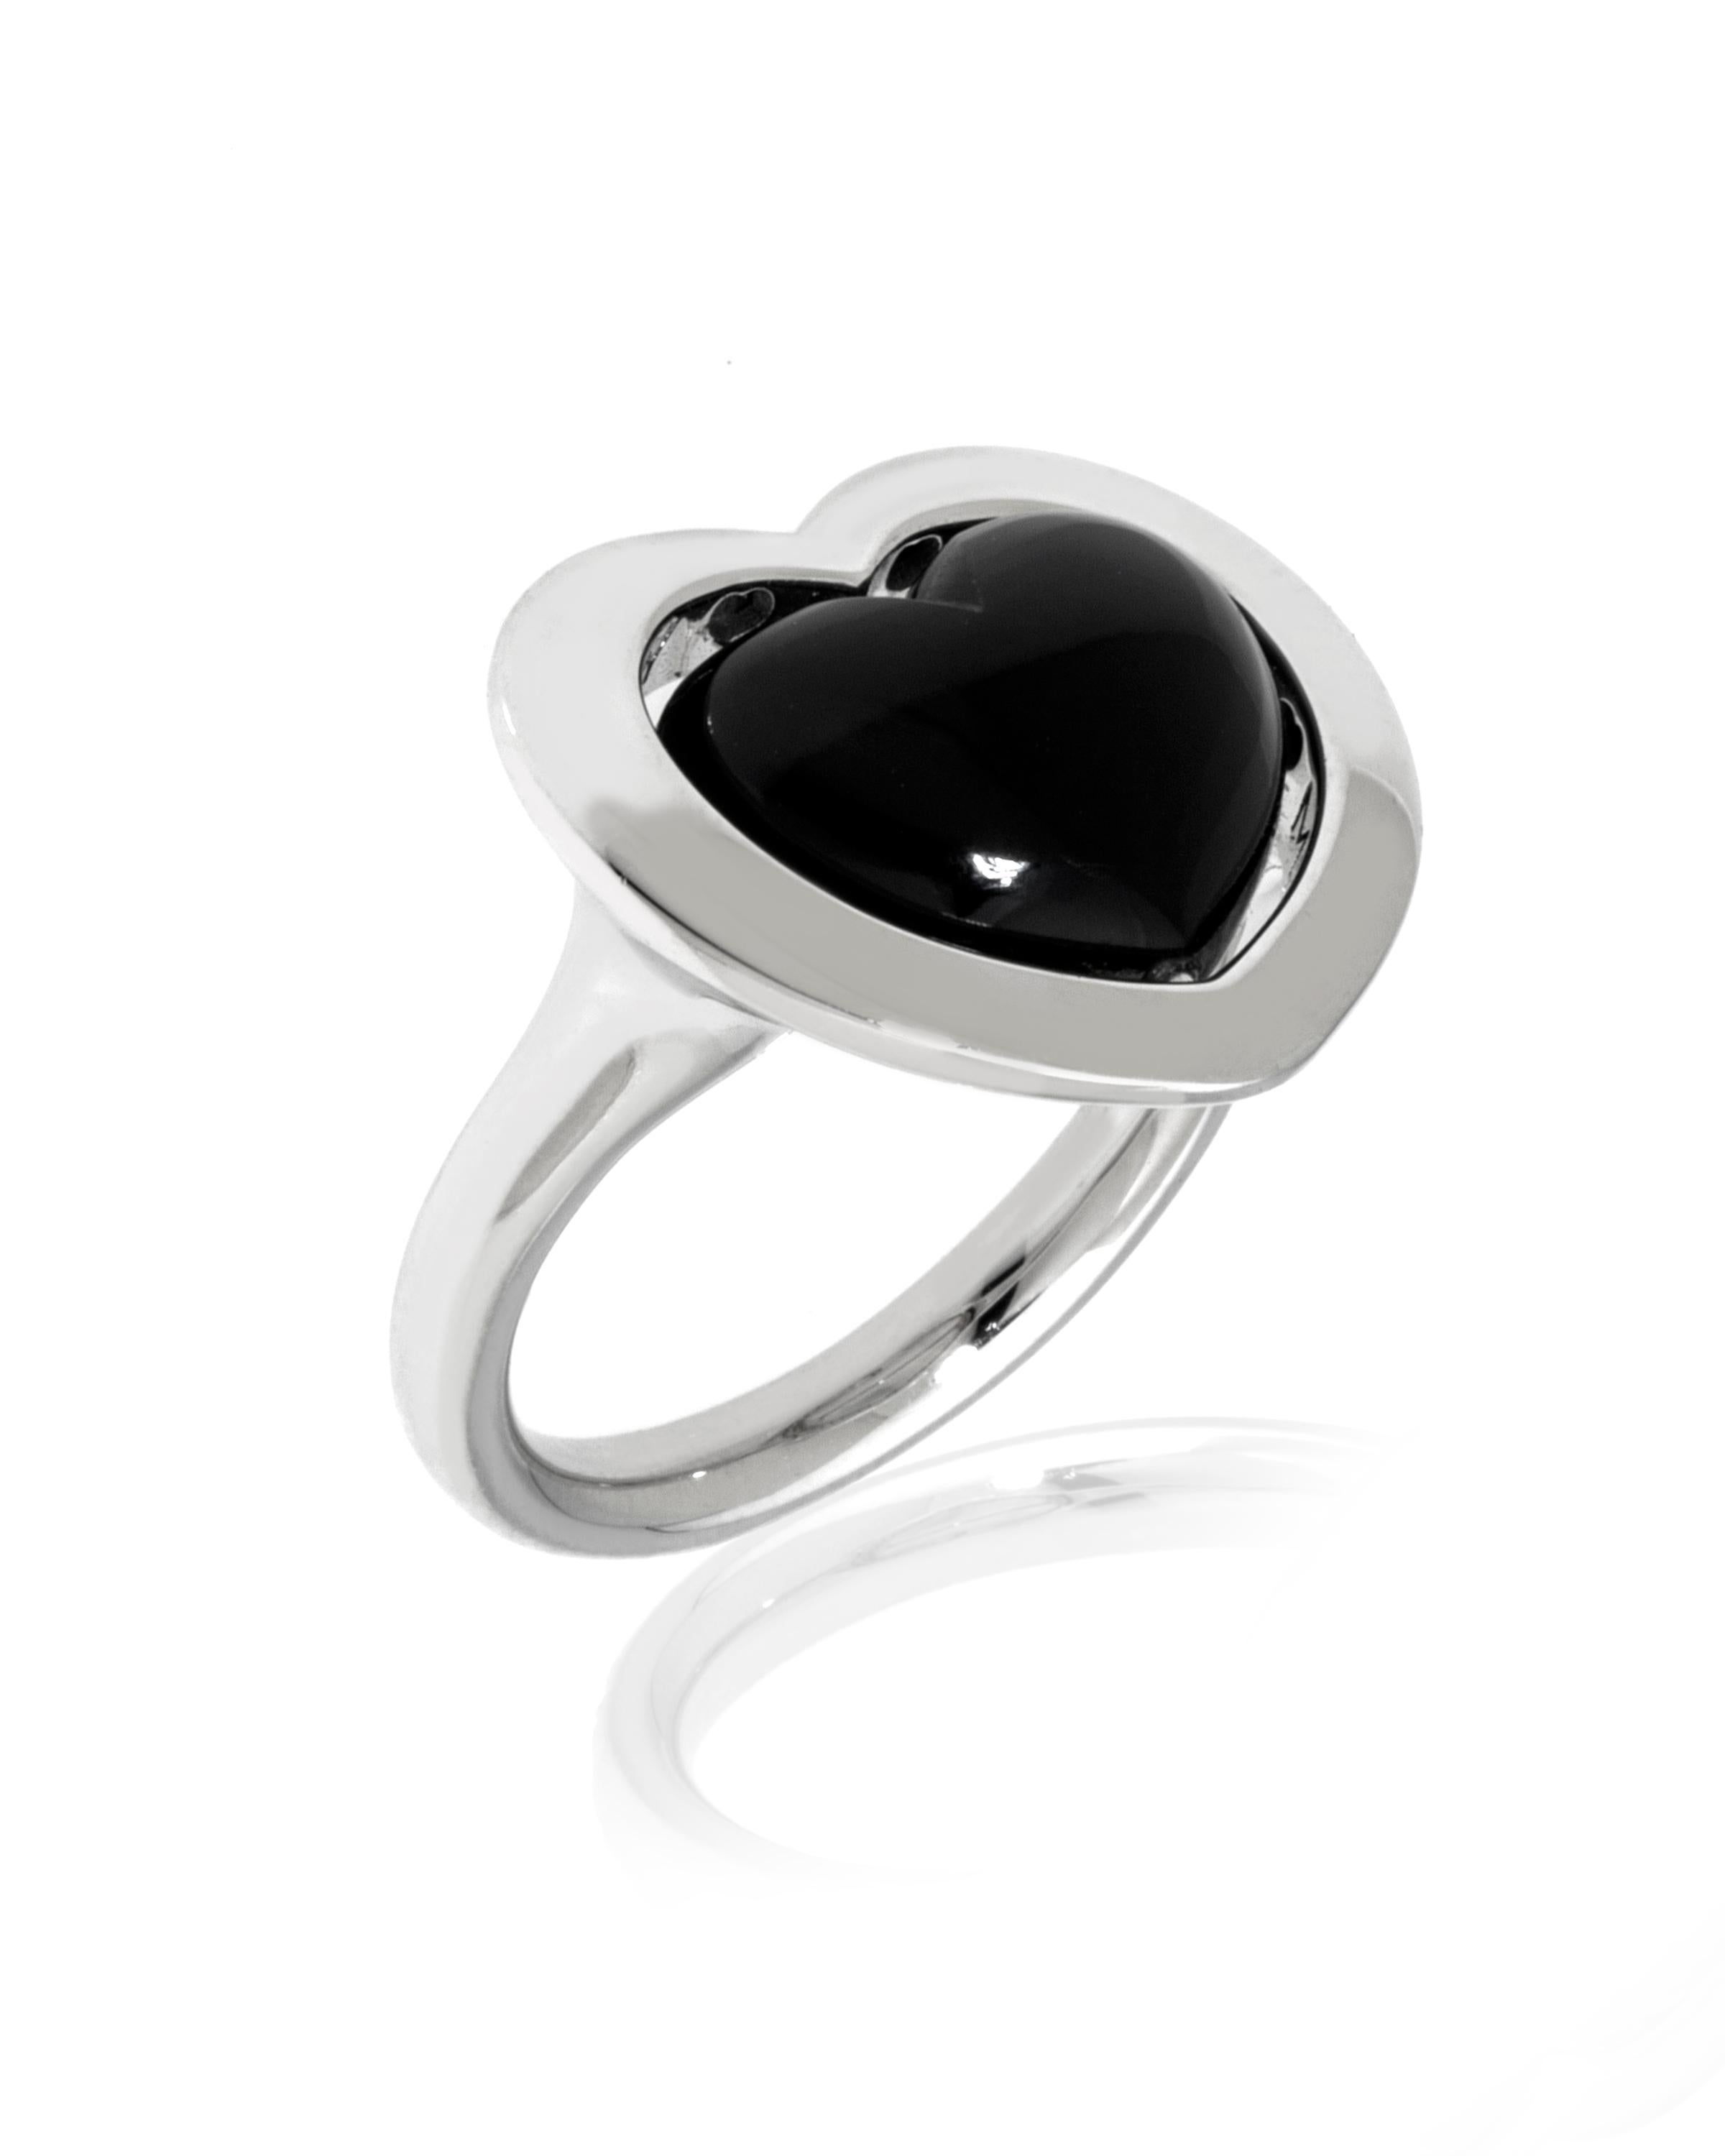 This whimsical Mimi Milano 18K white gold cocktail ring features an onyx convex heart which can be rotated to reveal a flat white gold side, framed in a matching 18K white gold frame and band. The ring size is 6.75. The decoration size is 3/4